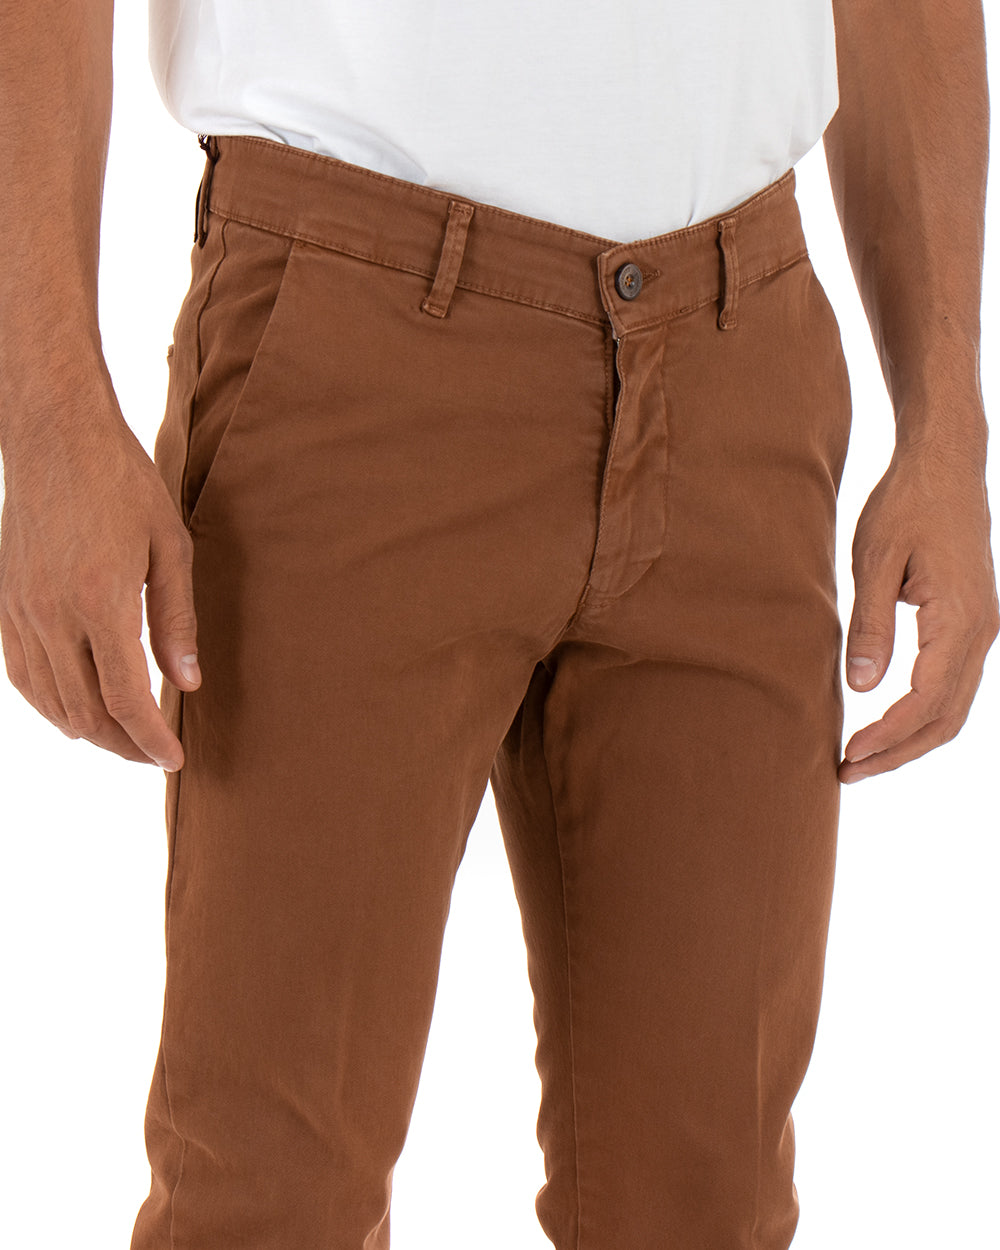 Classic Men's Solid Color Long Casual Trousers Camel Basic GIOSAL